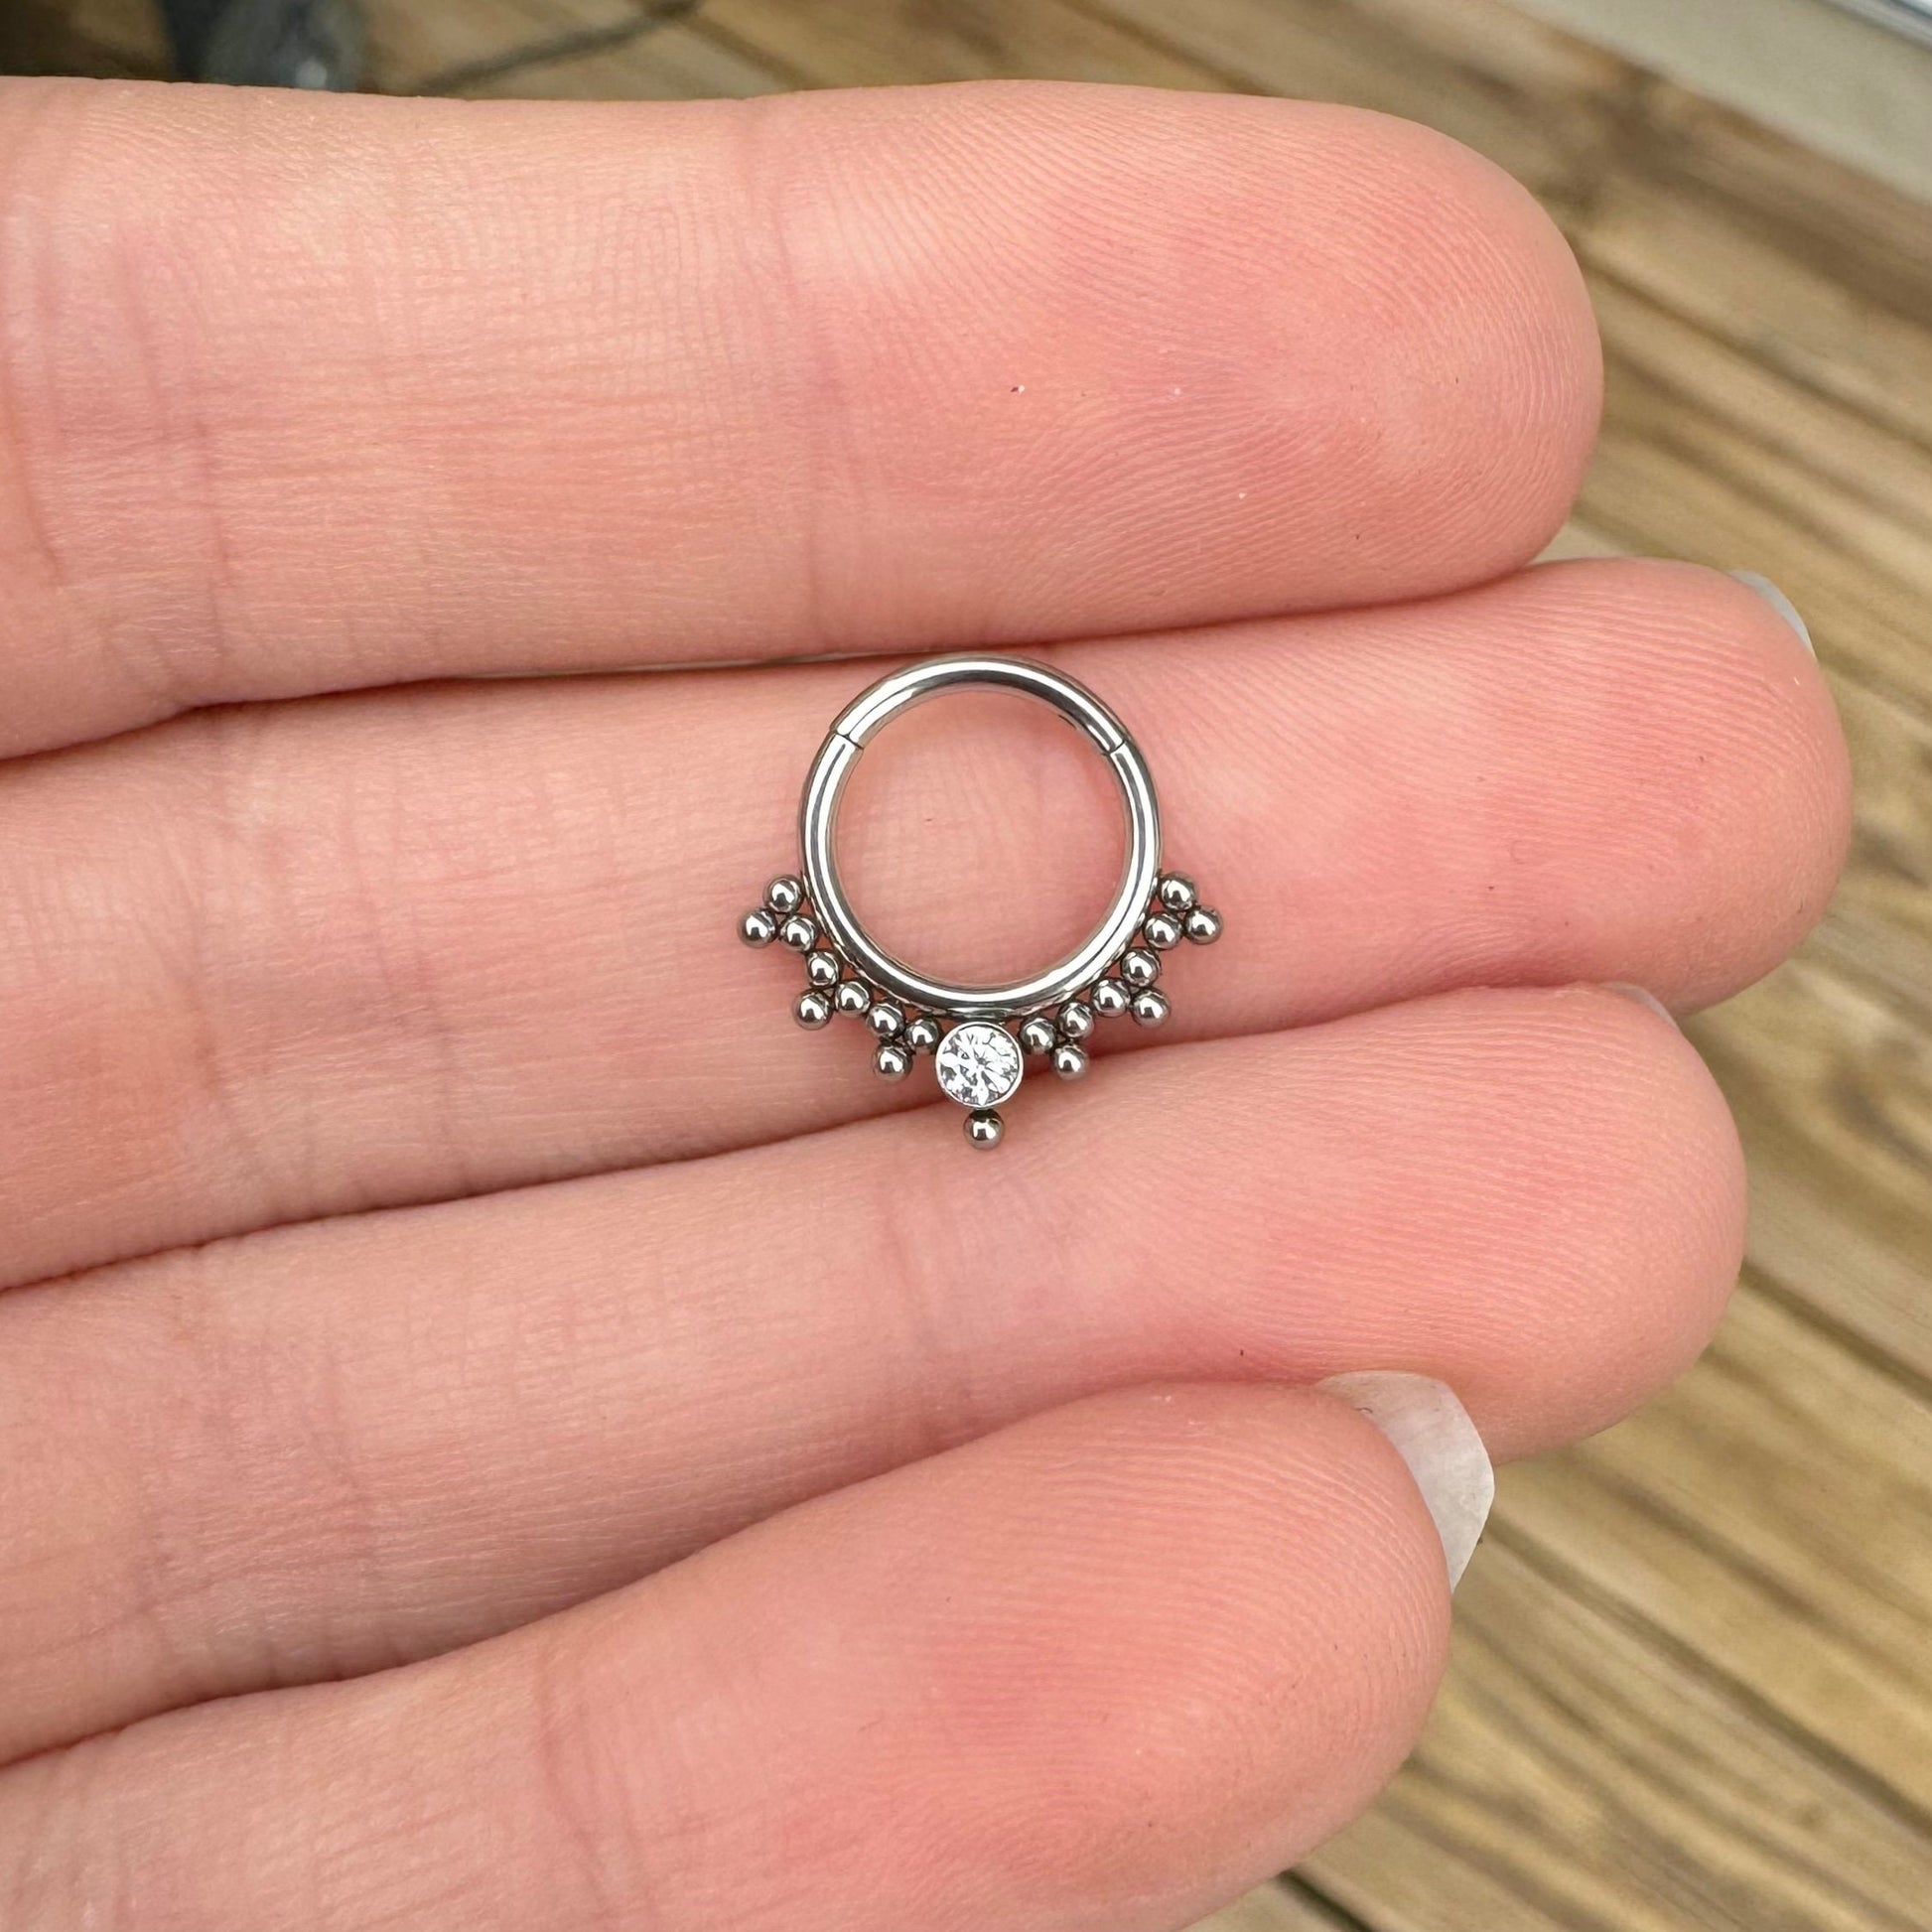 Unique Daith Earring (16G, 8mm, Surgical Steel, Silver or Gold)